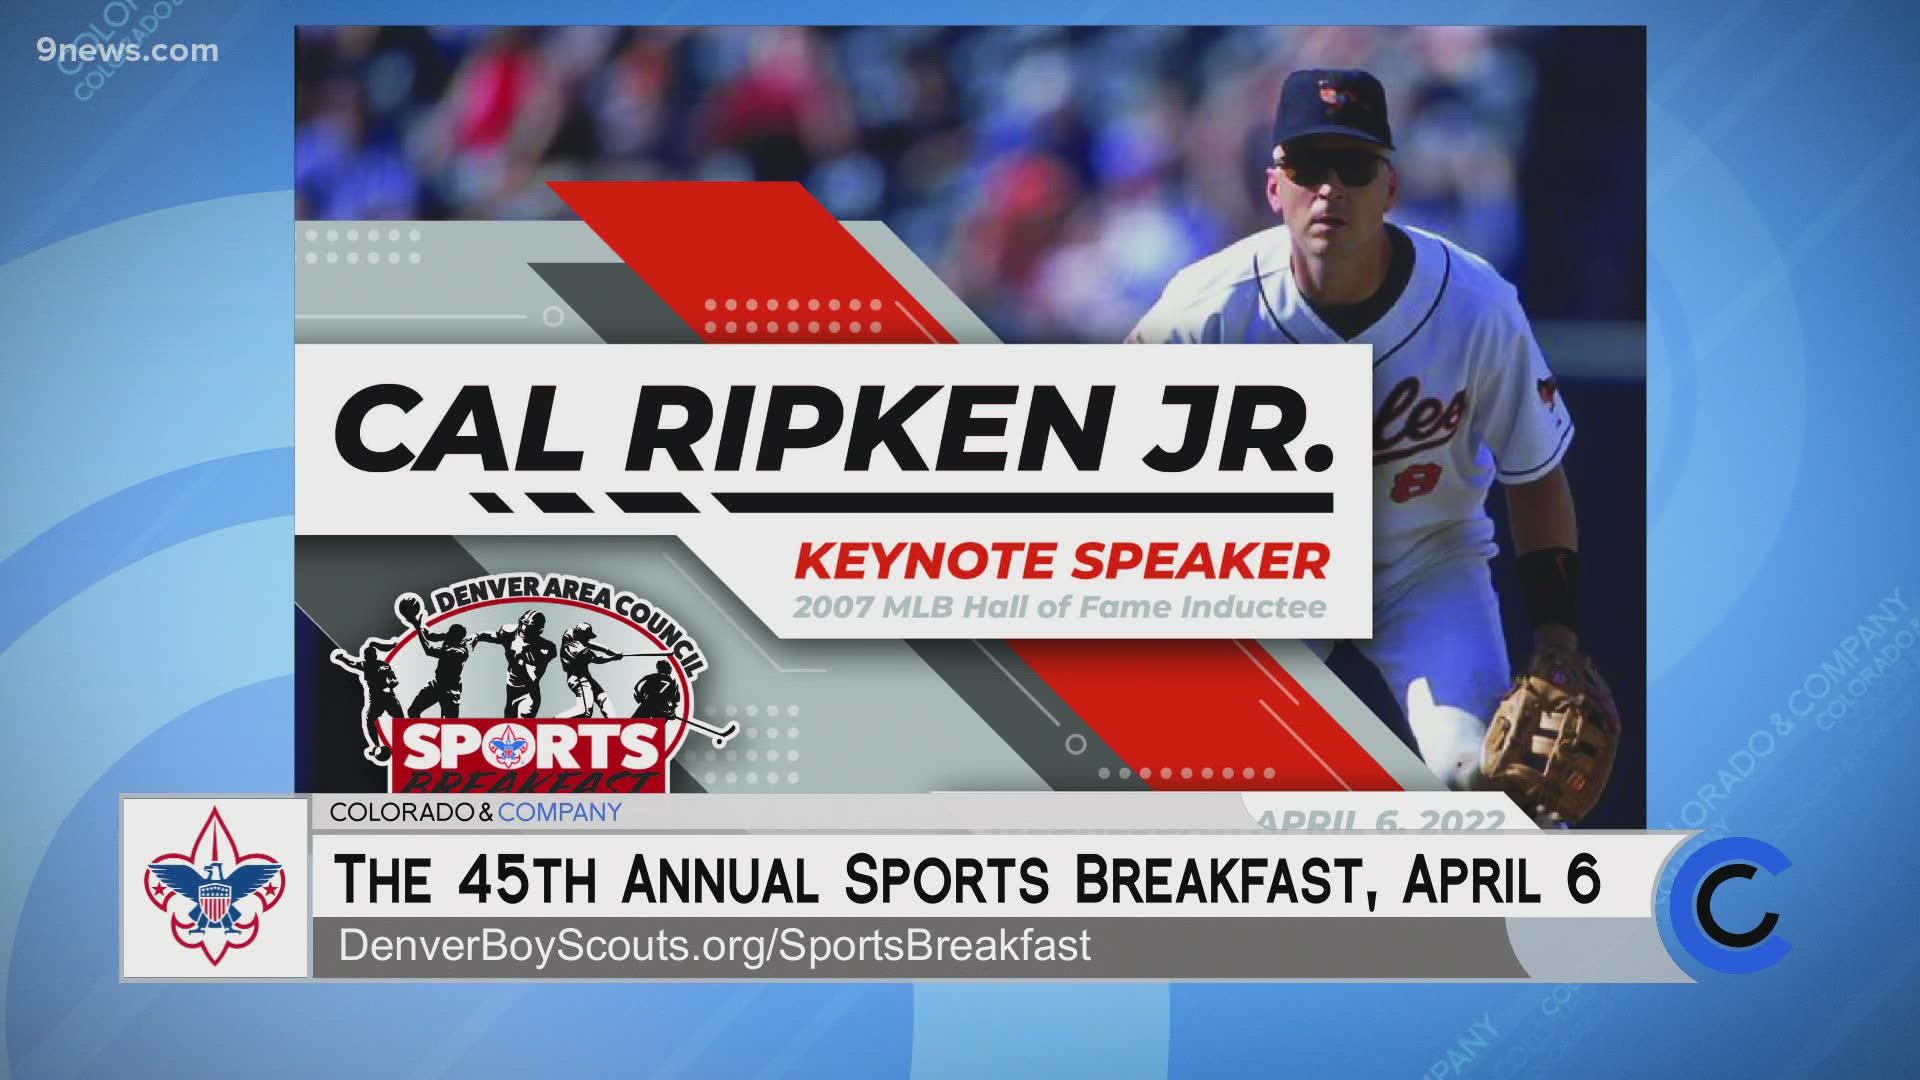 Don't miss the 45th Annual Sports Breakfast with guest speaker Cal Ripken Jr. Learn more at DenverBoyScouts.org.